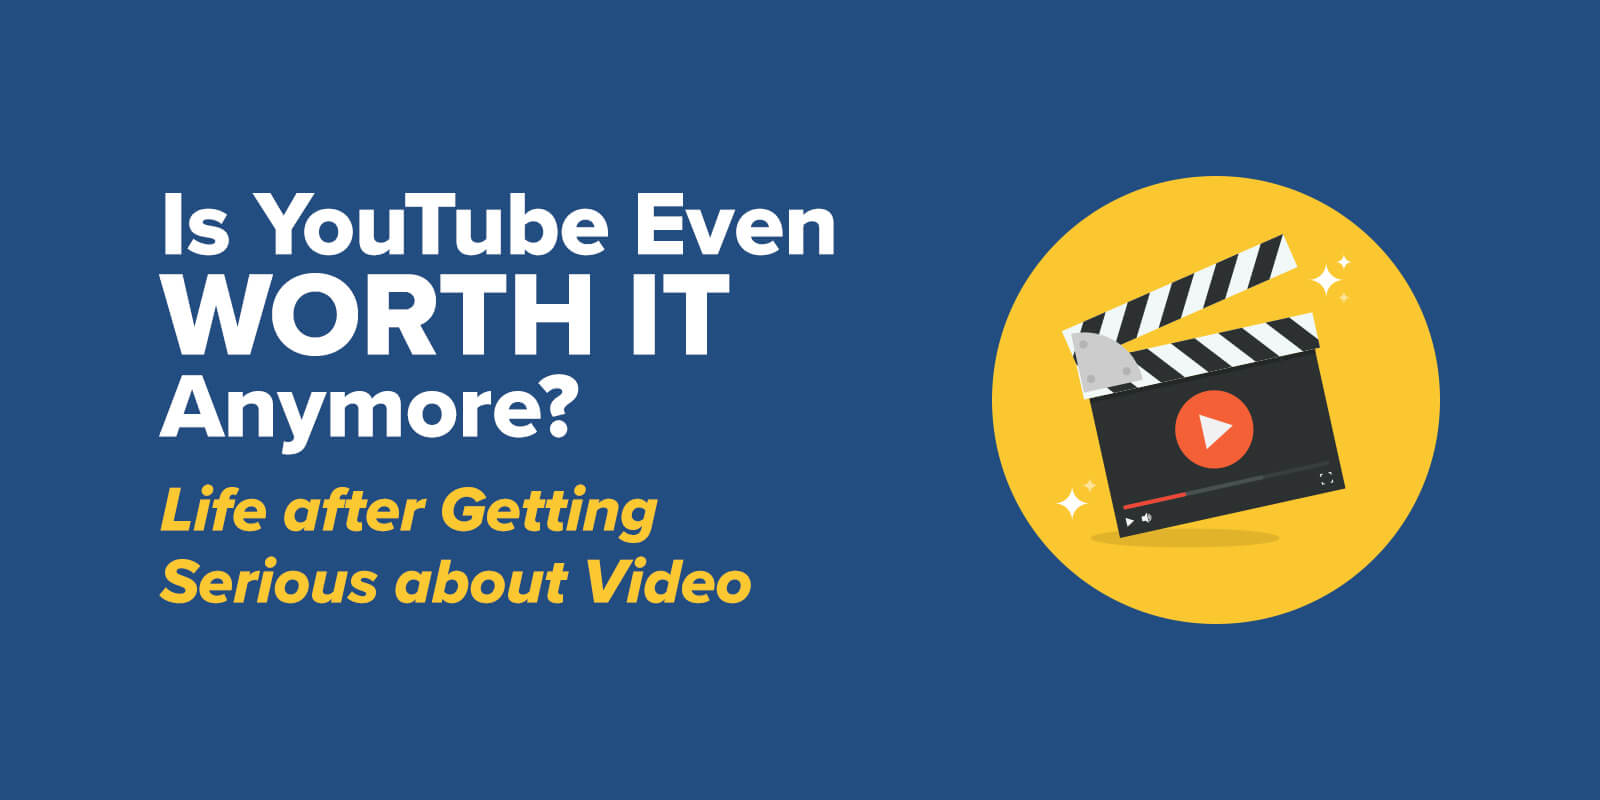 Is YouTube Even Worth it Anymore? Life after Getting Serious about Video